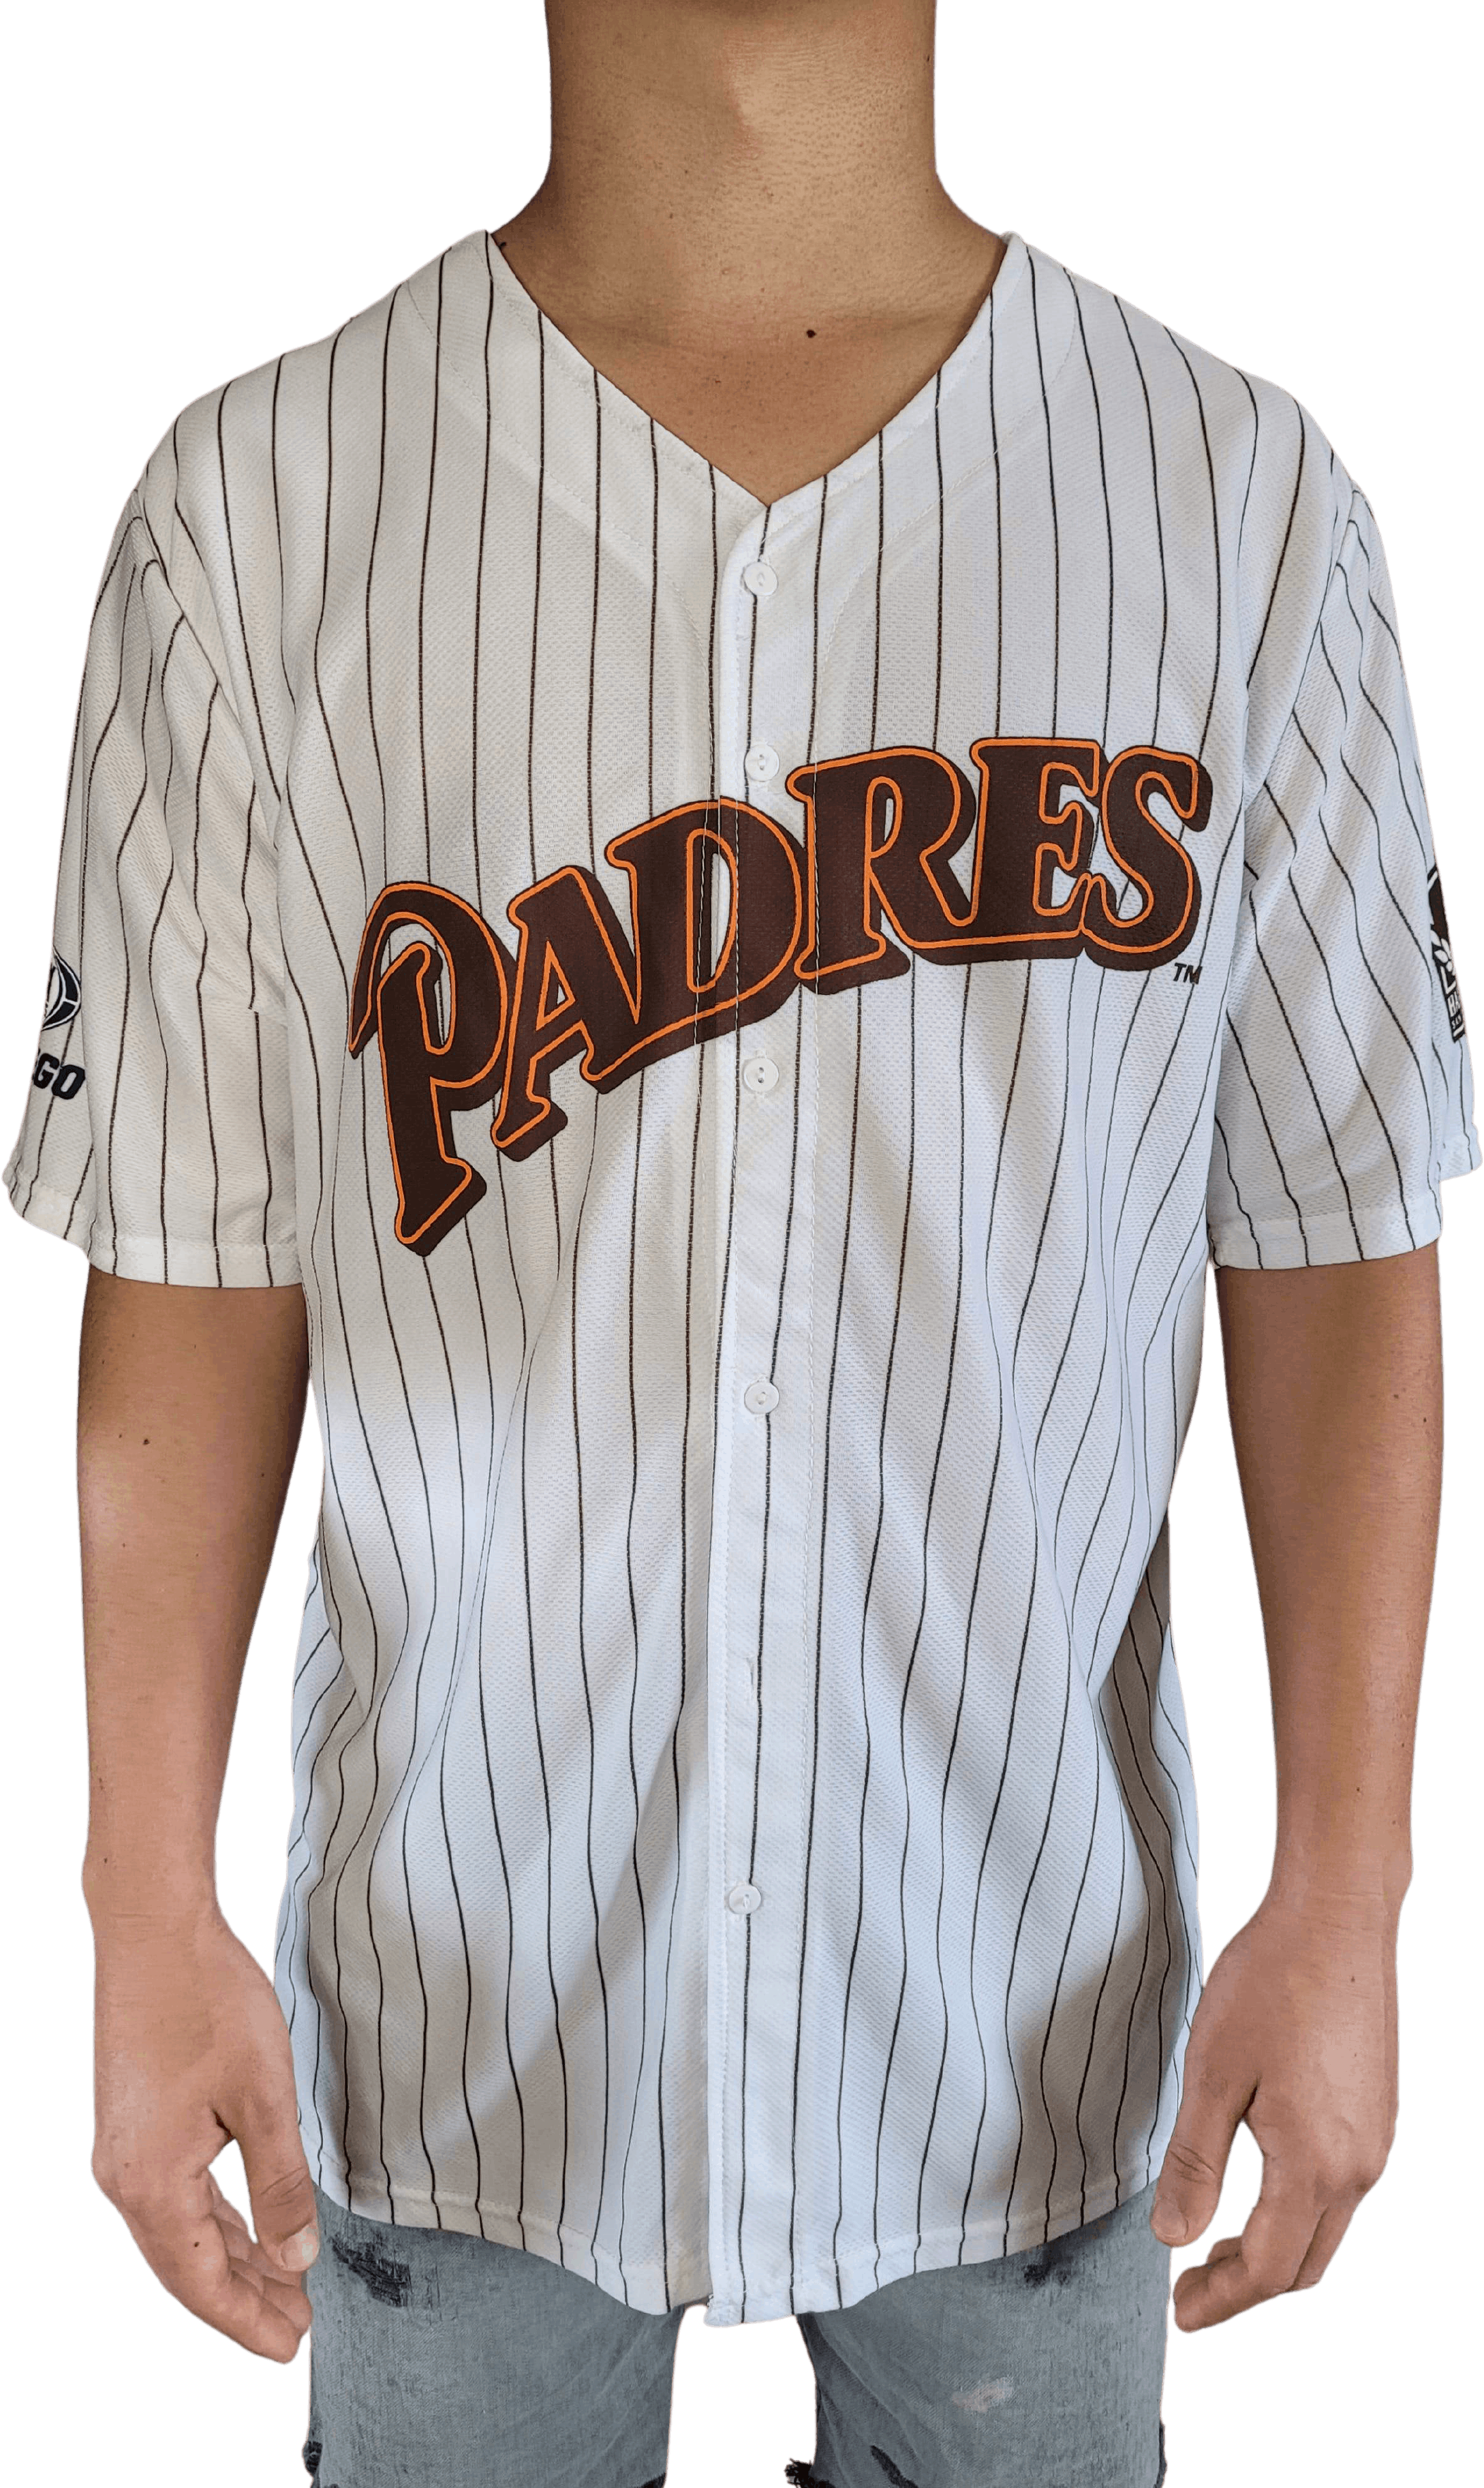 Padres Baseball Jersey 90s Retro Throwback Pinstripes for Sale in